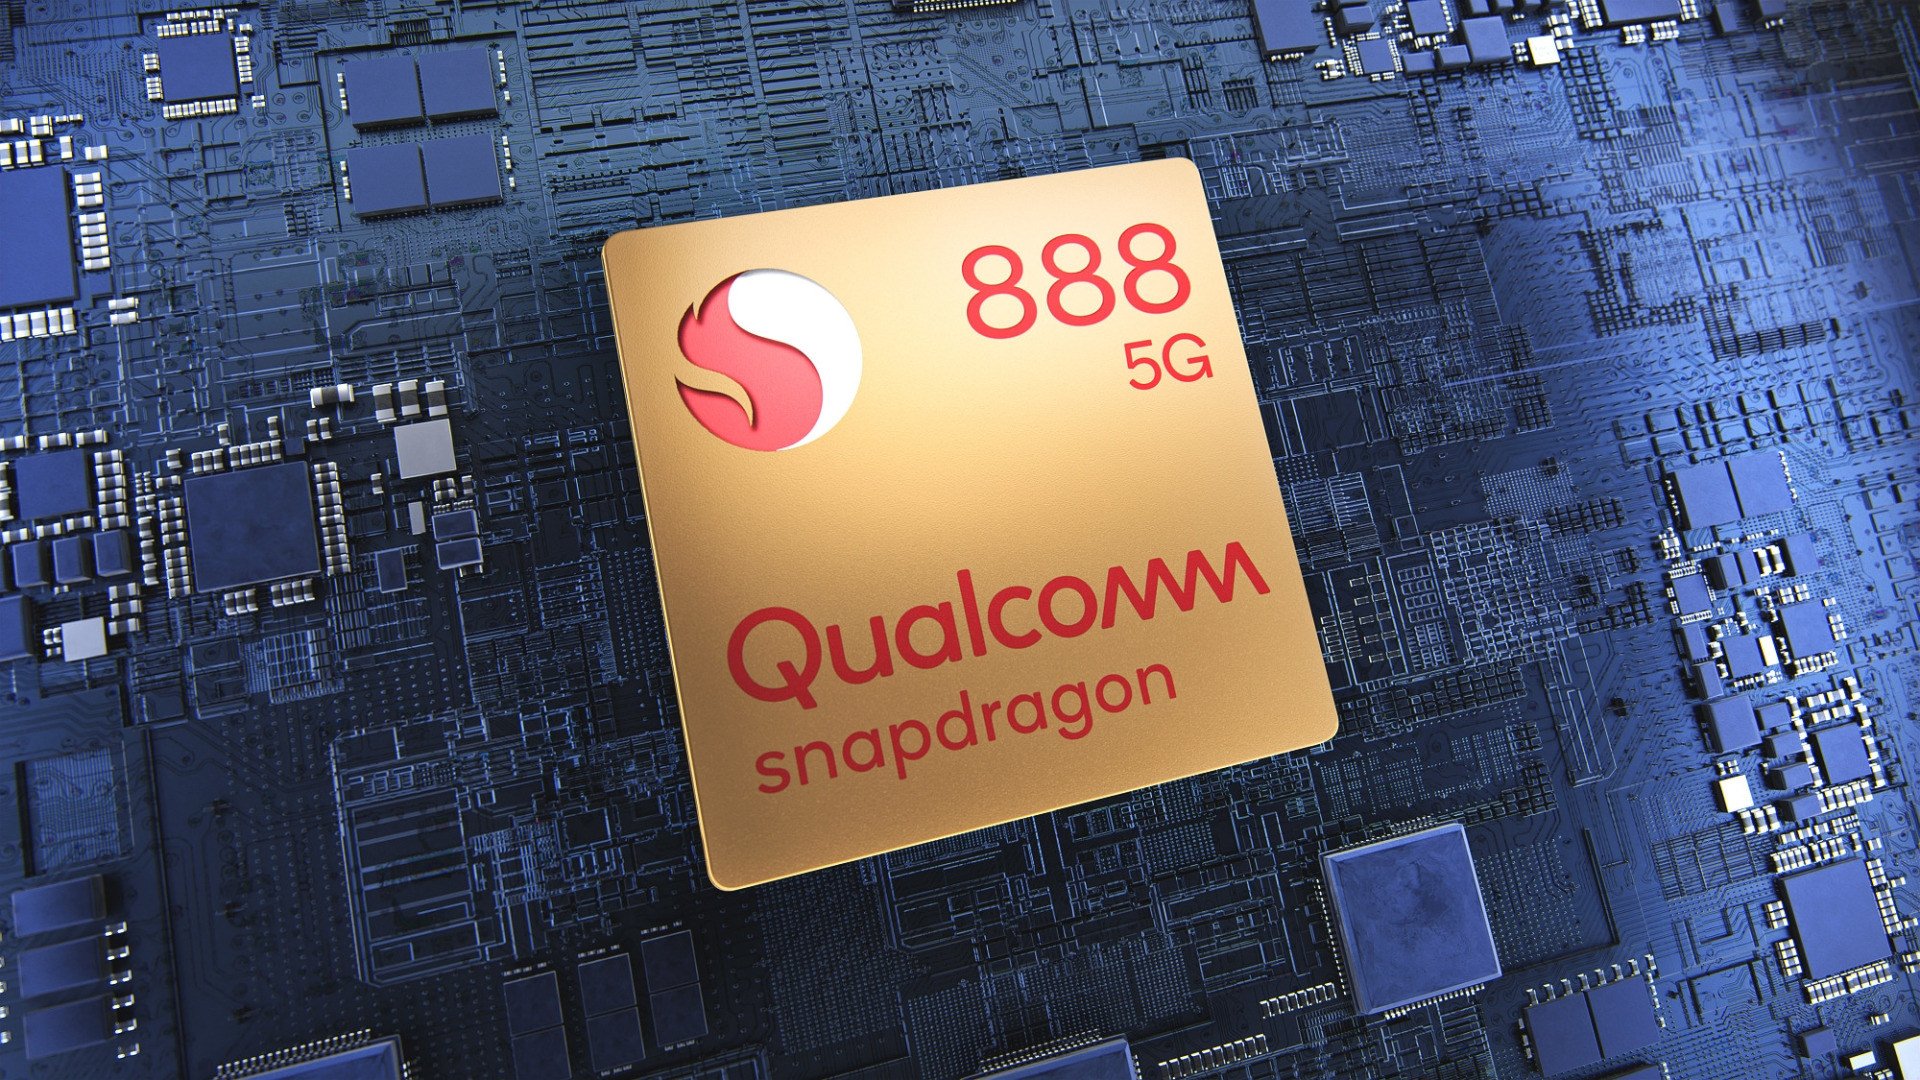 Flashing: Samsung asked Qualcomm for more smartphone chips